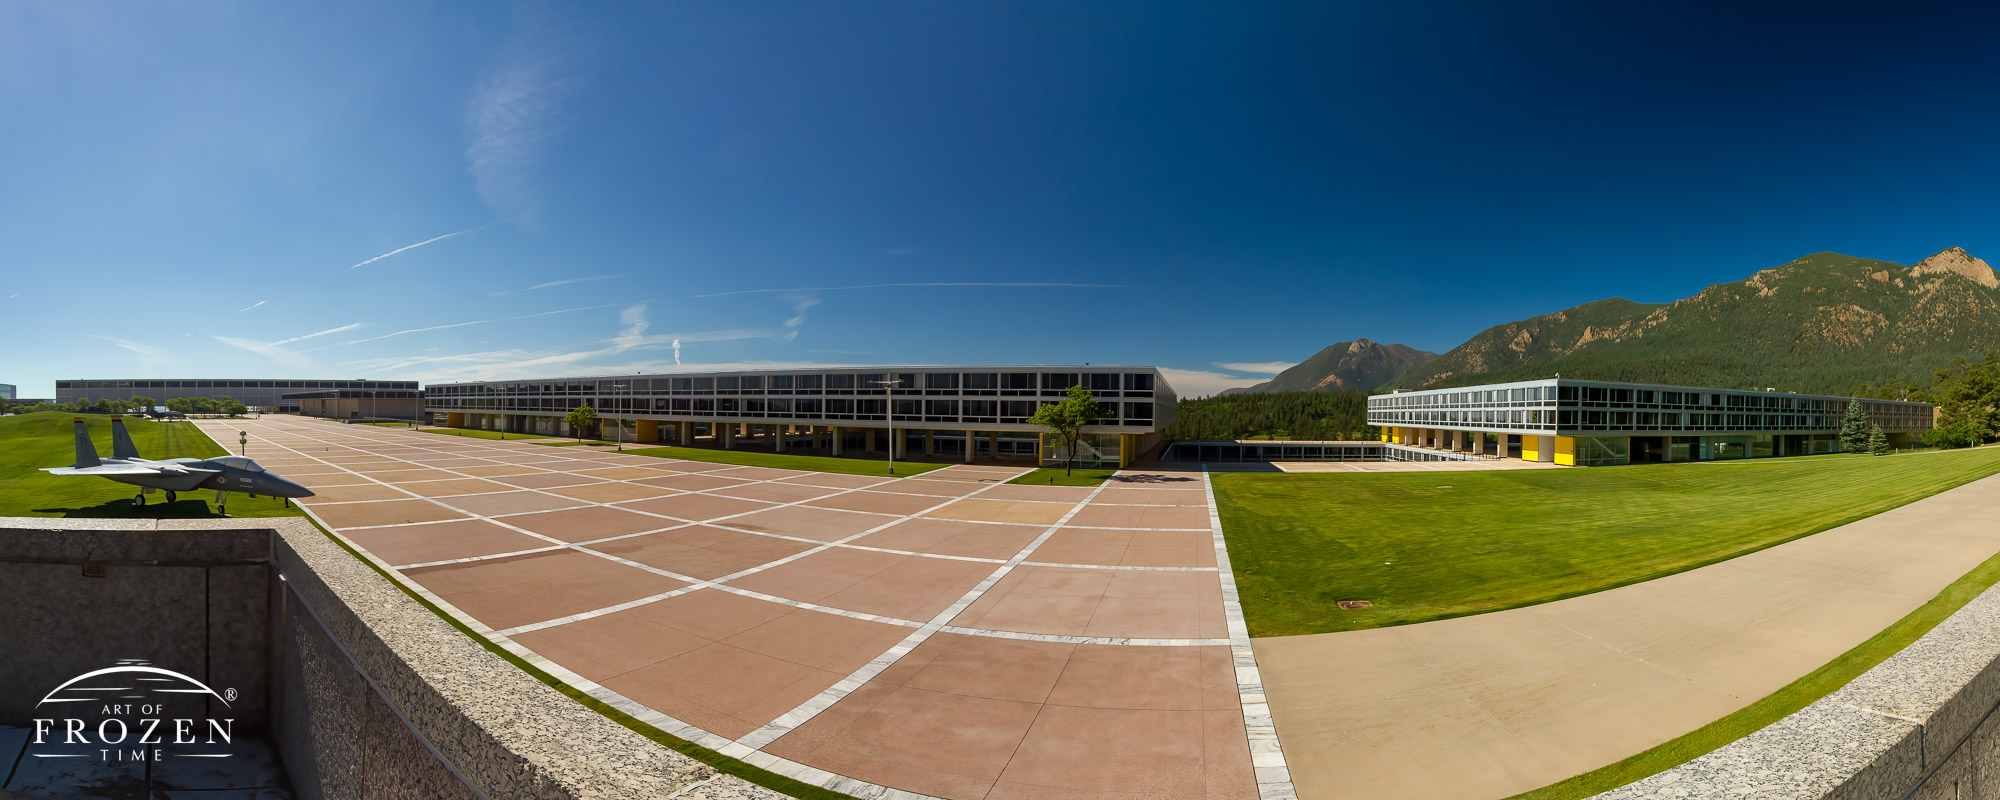 A panorama of the Air Force Academy as viewed from the Cadet Chapel showing how the Terrazzo spans the campus below the foot hills of the Rocky Mountains